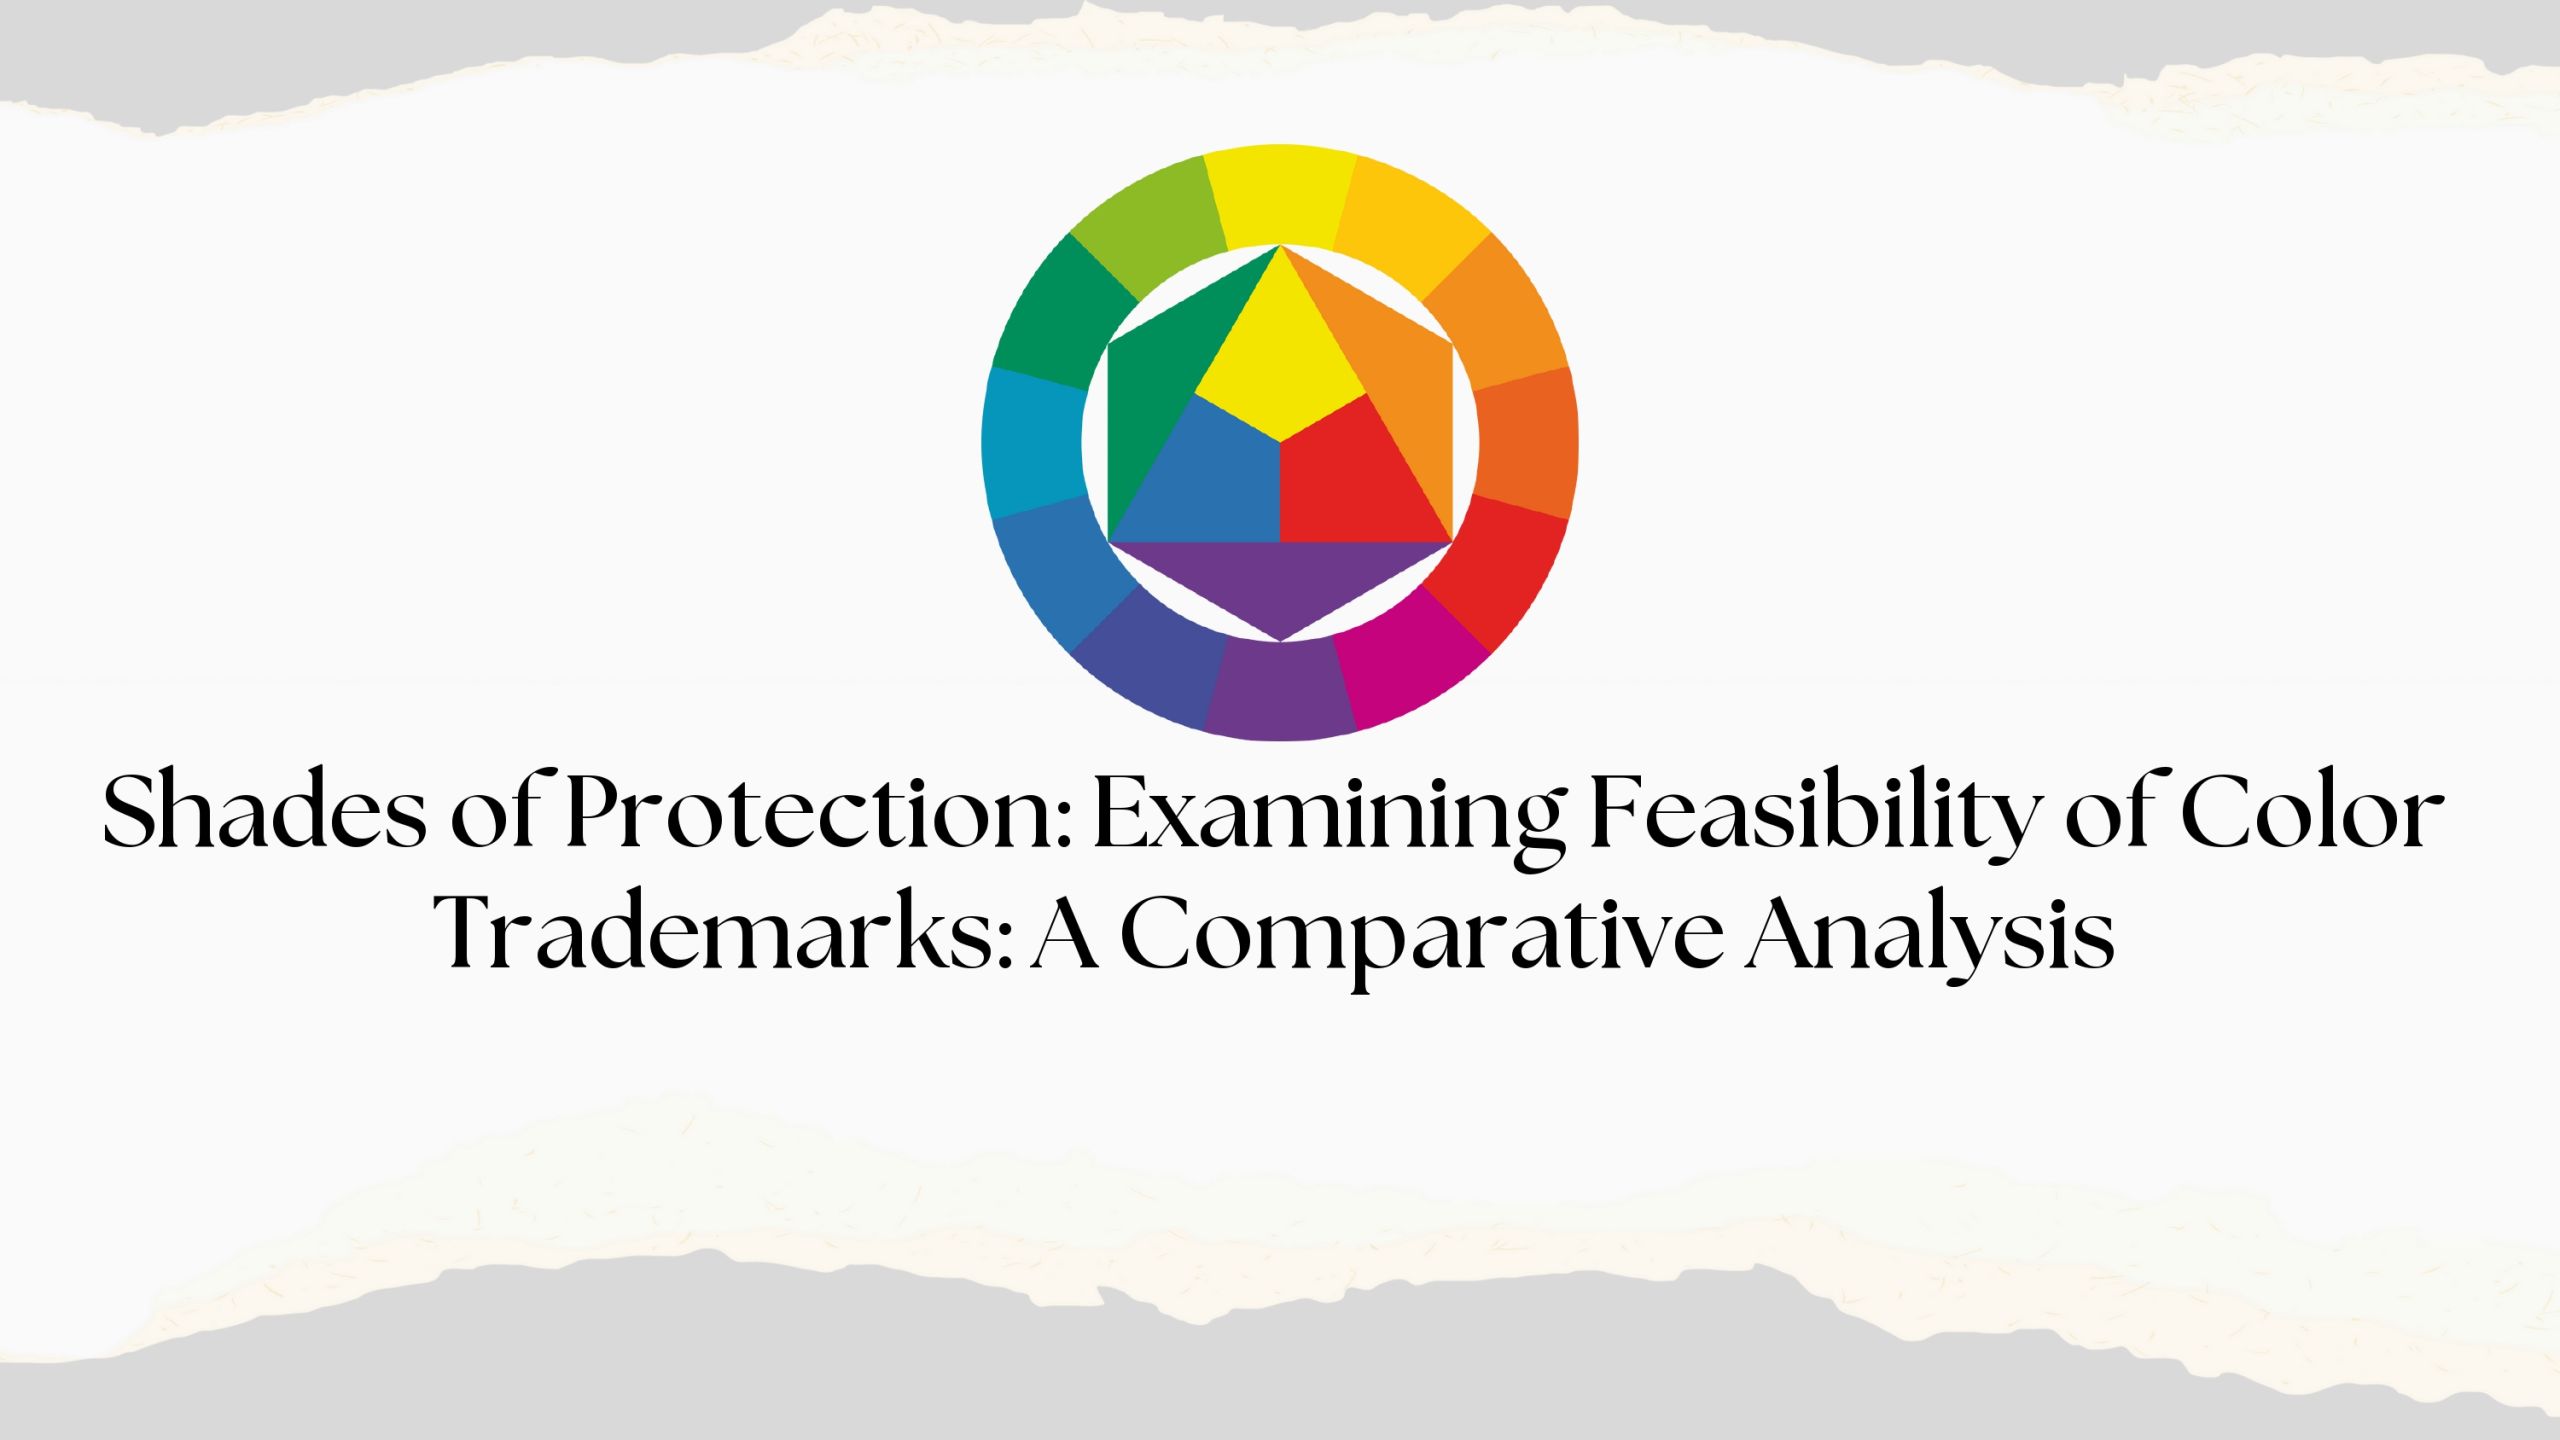 shades-of-protection-examining-feasibility-of-color-trademarks-a-comparative-analysis